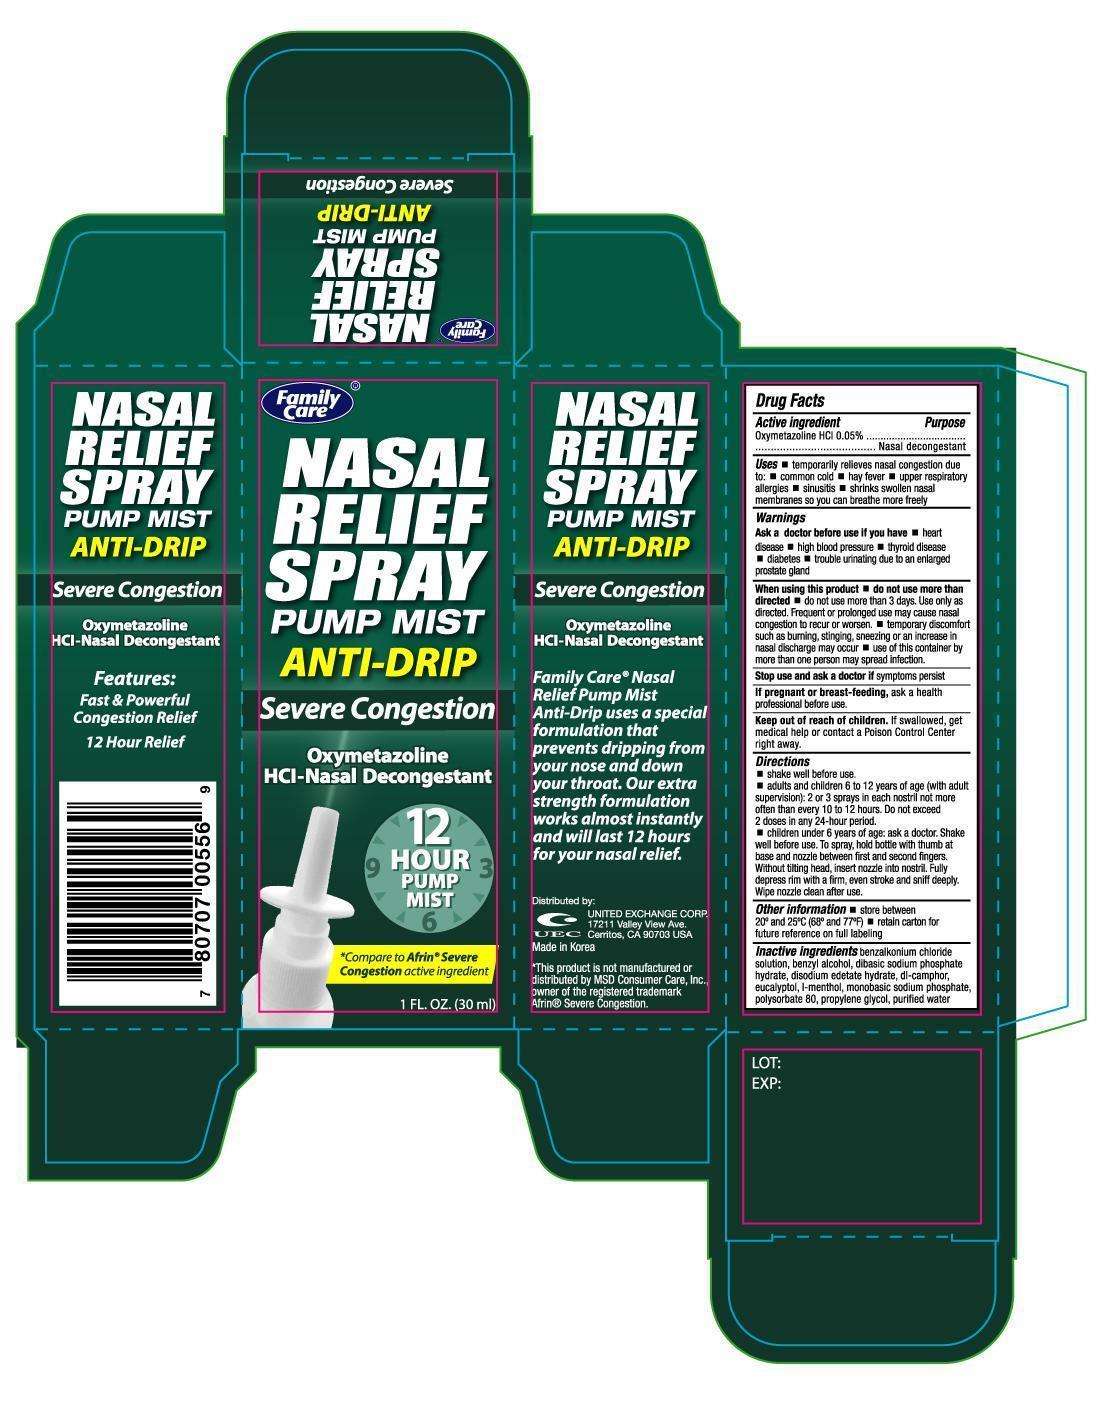 Family Care Nasal Relief